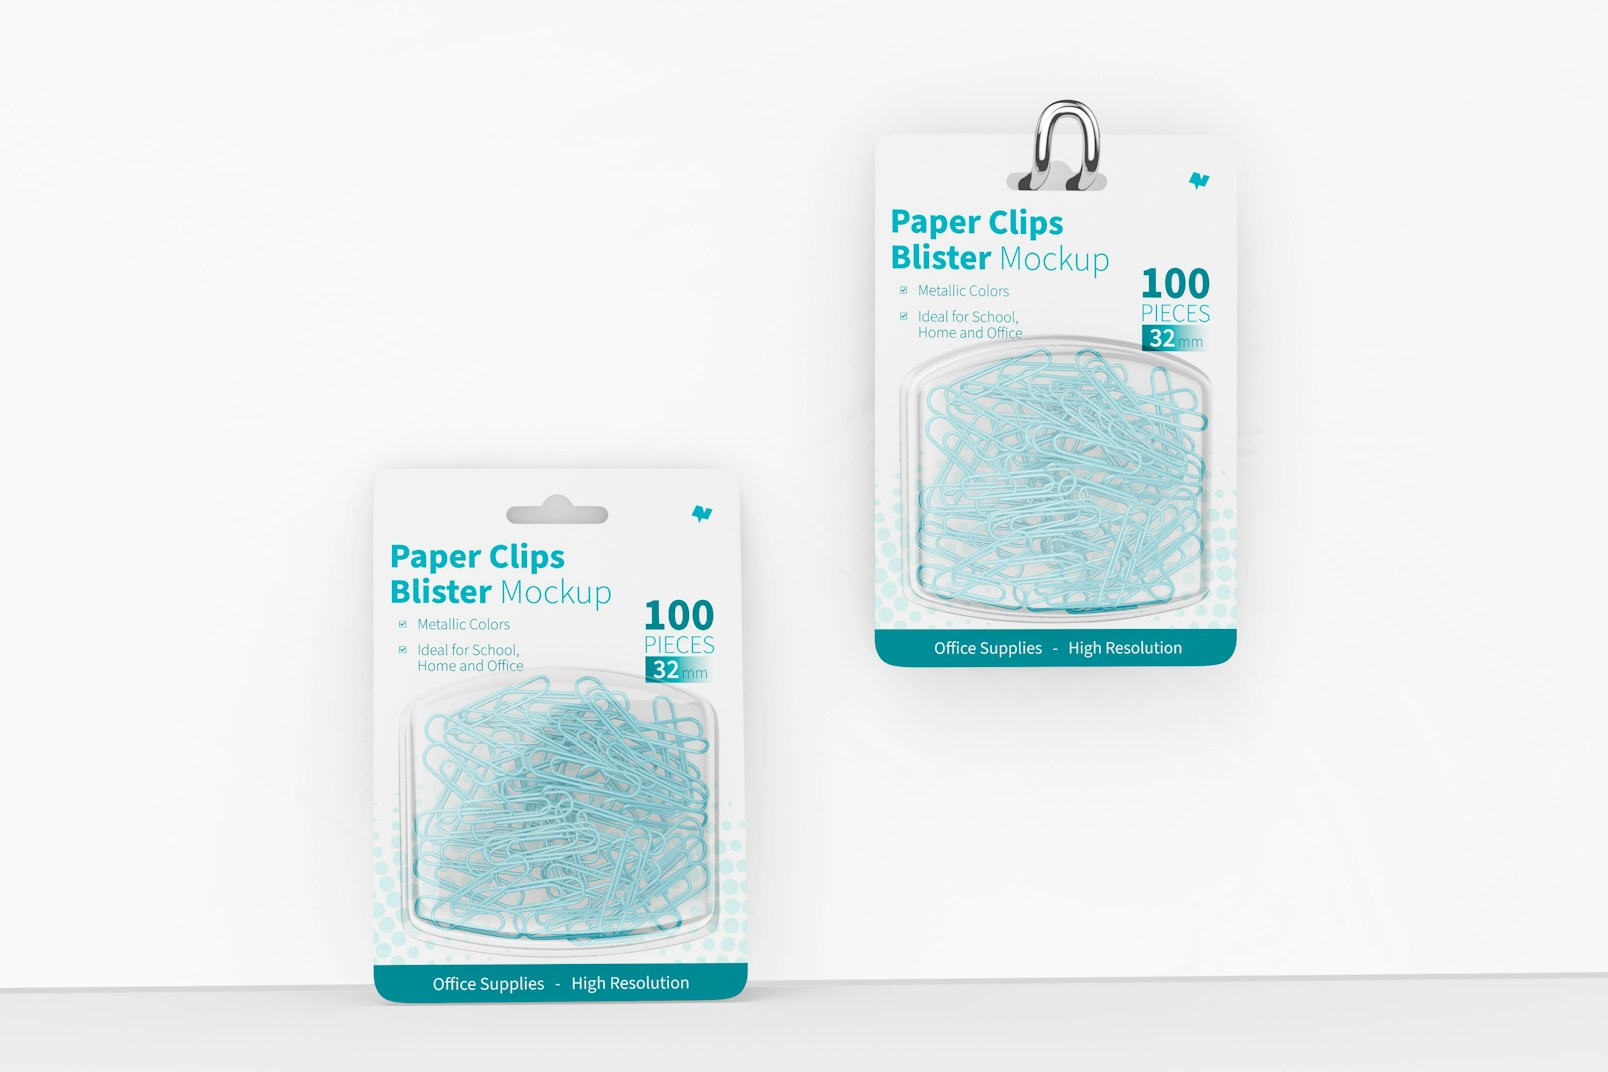 Paper Clips Blisters Mockup, Hanging and Leaned